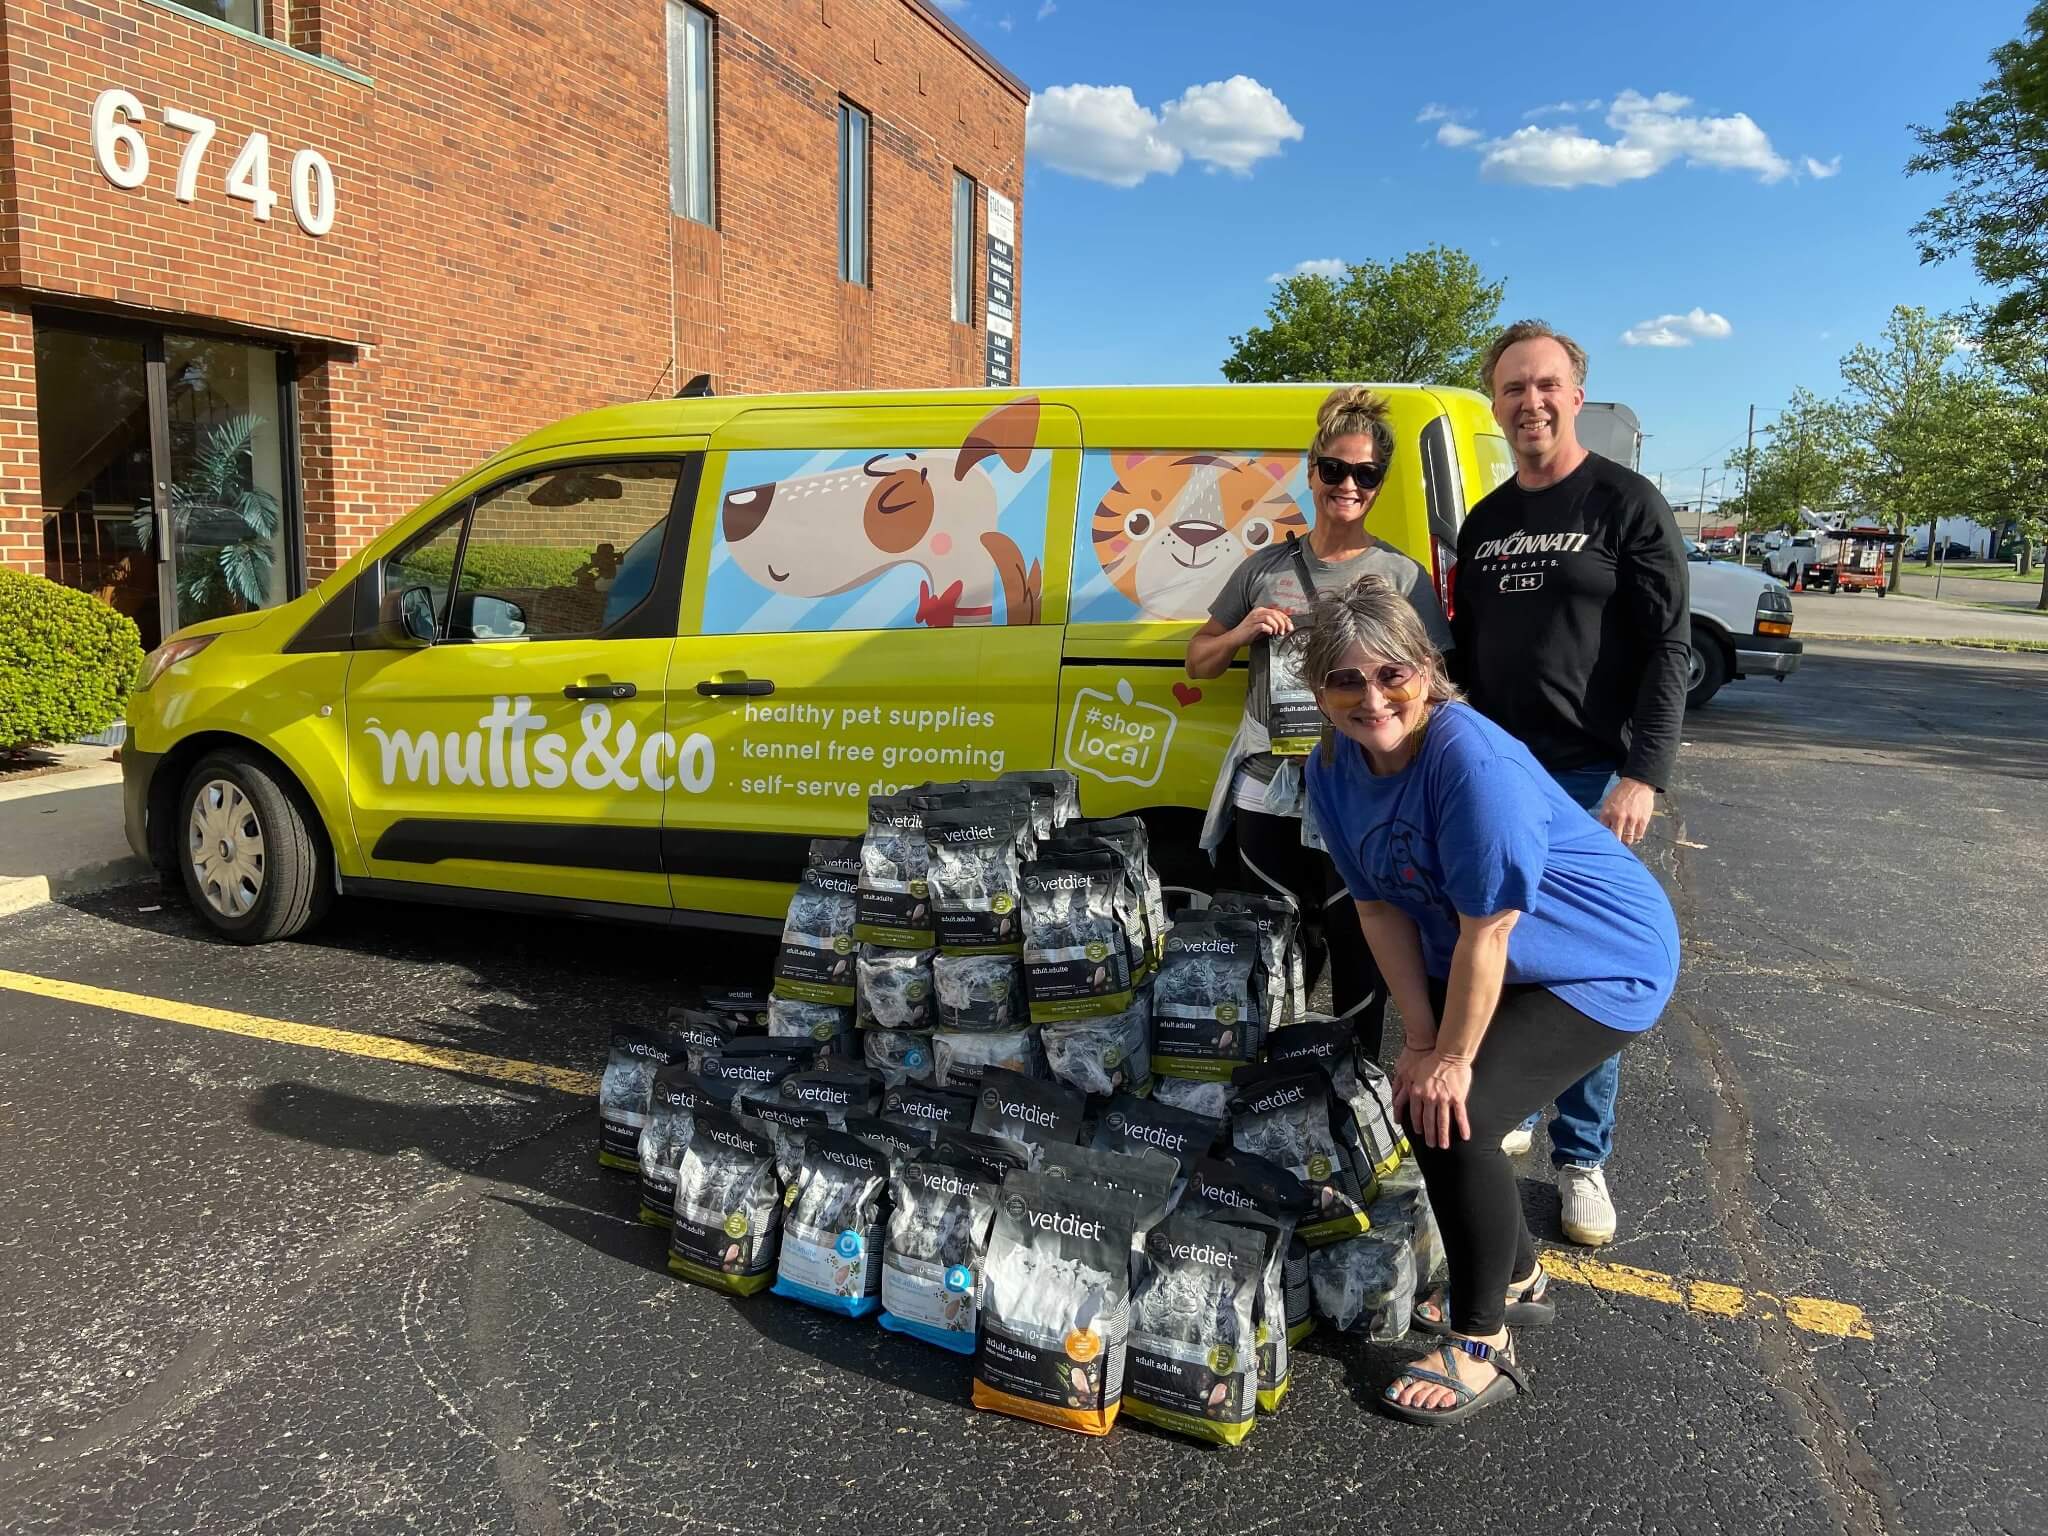 The Mutts & Co team delivering dog food in Ohio